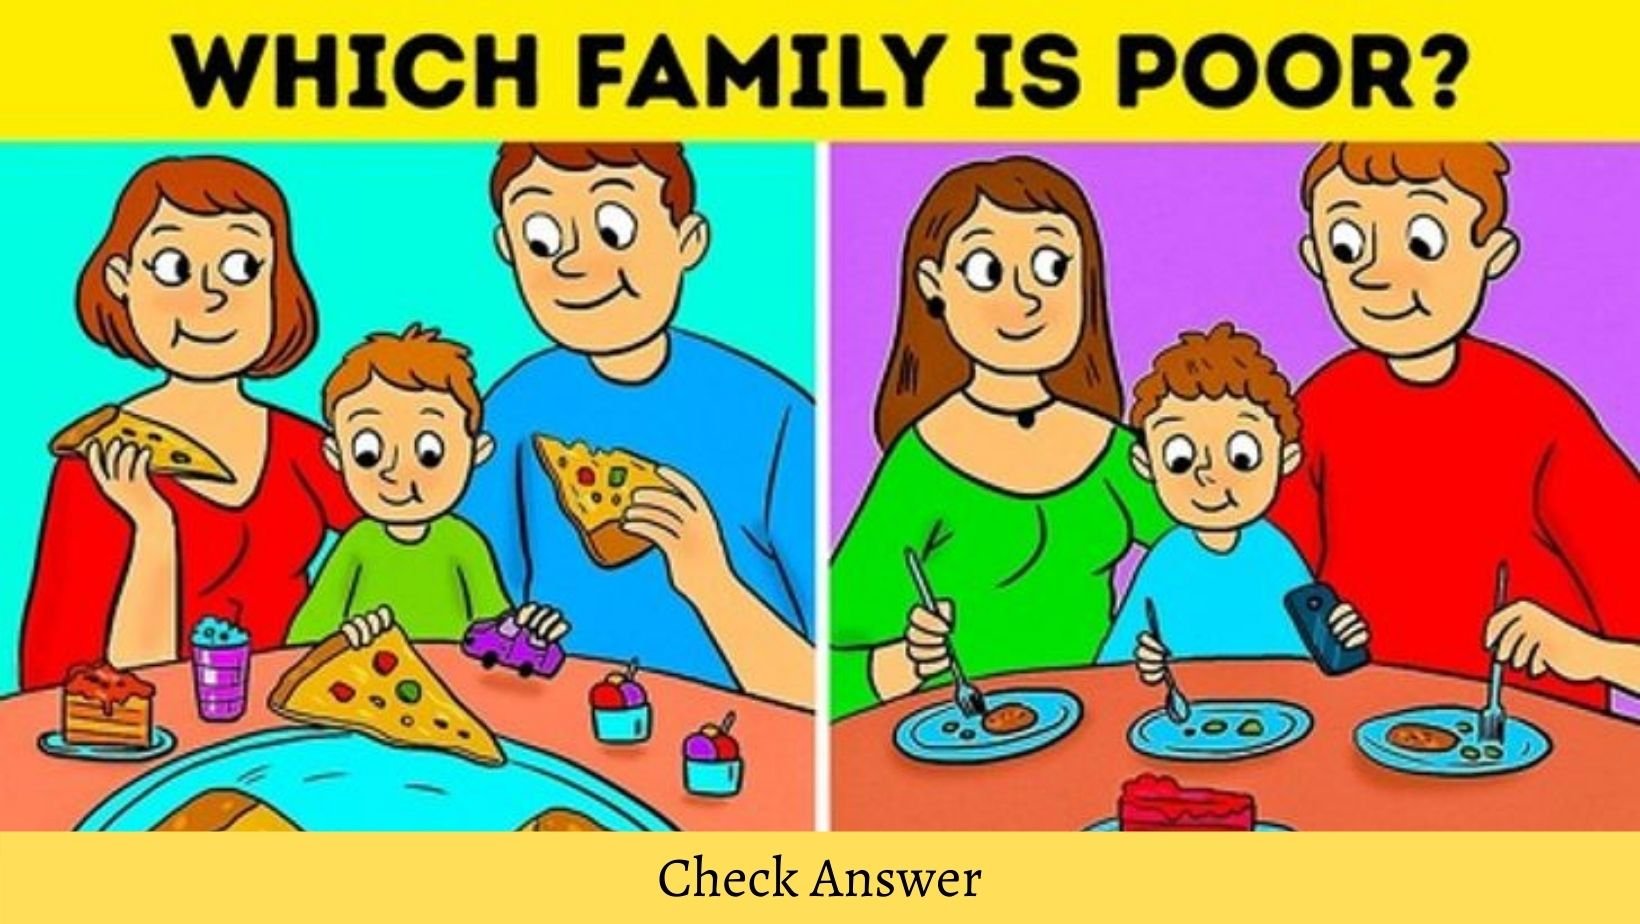 Can You Guess Which Family Is Poor?